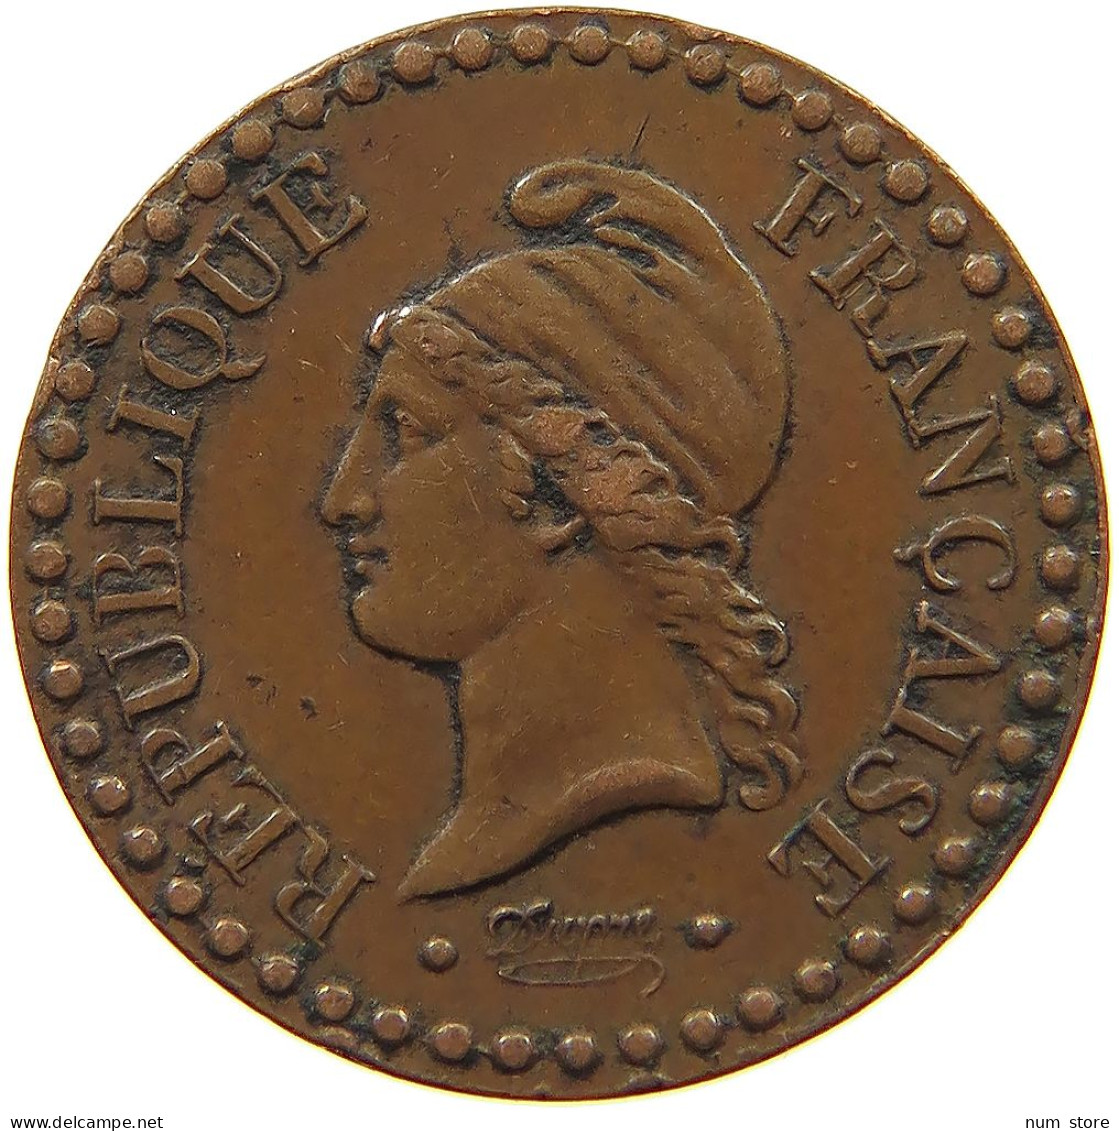 FRANCE CENTIME 1849 A  #s060 0191 - 1 Centime